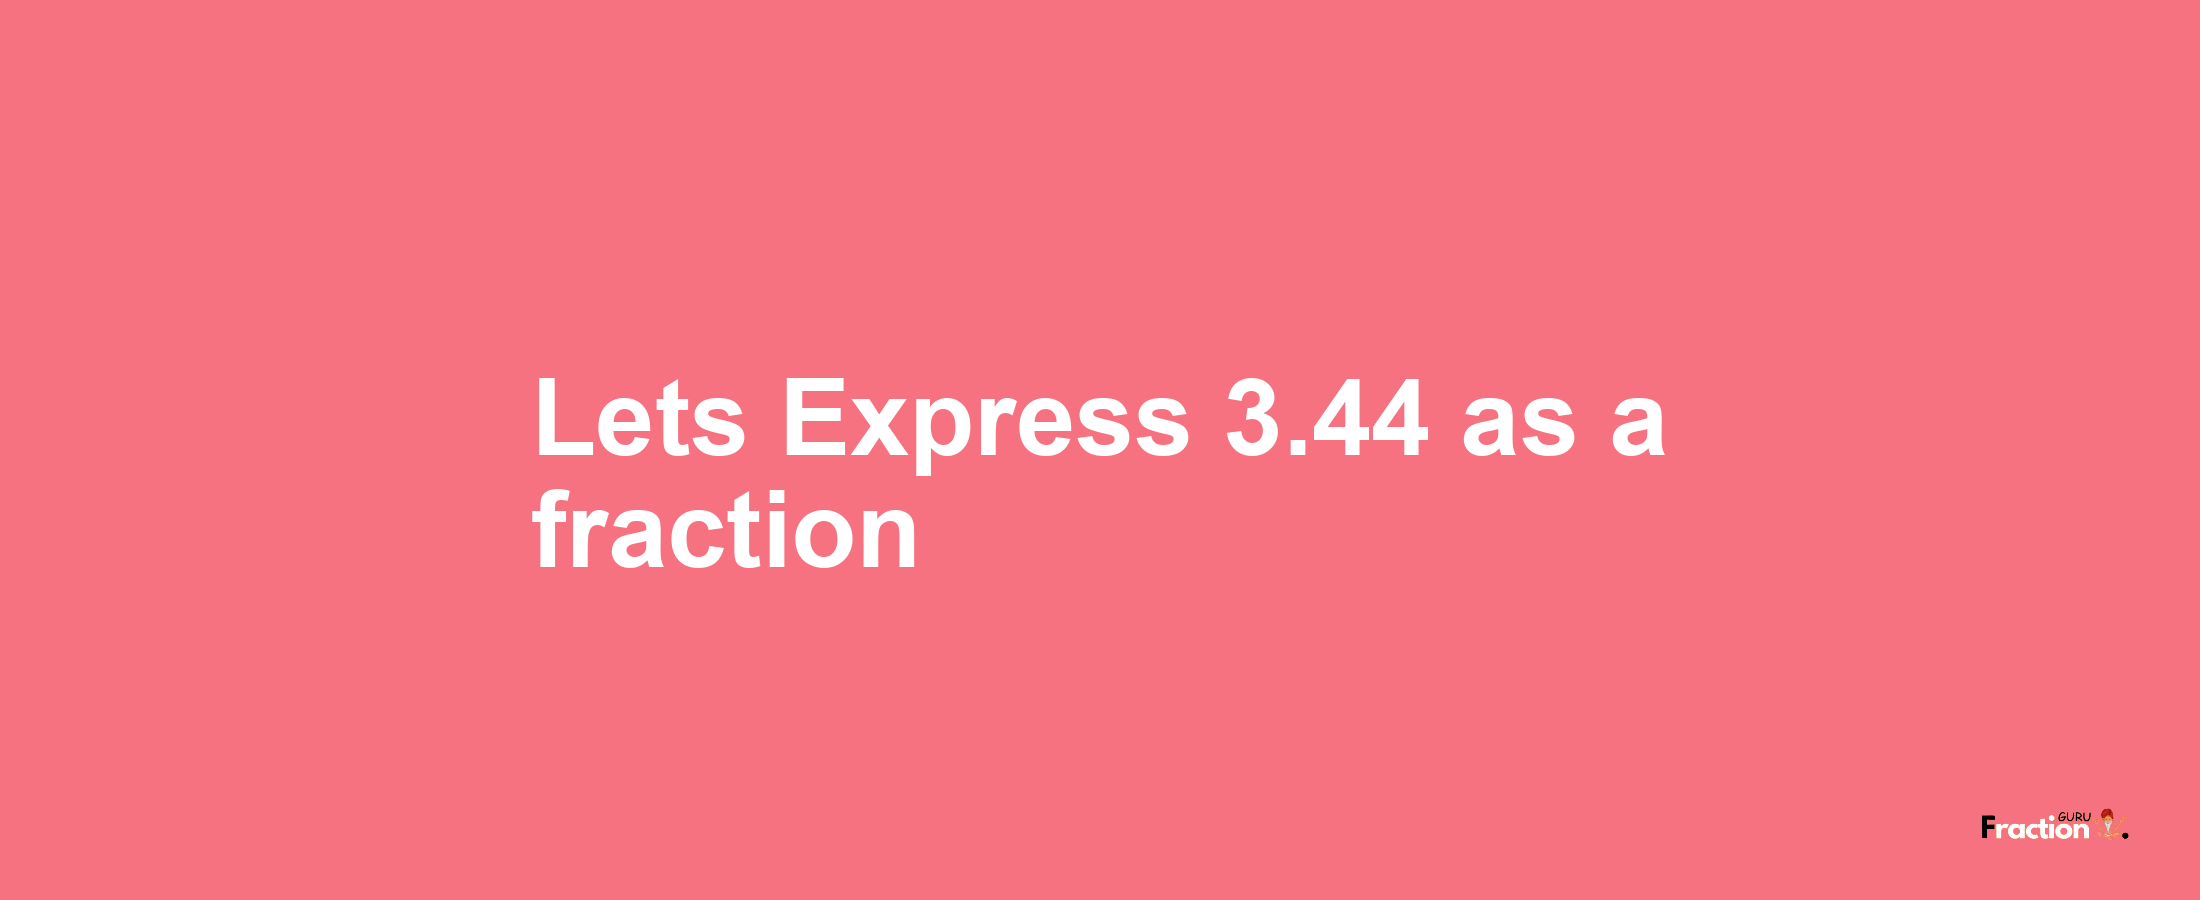 Lets Express 3.44 as afraction